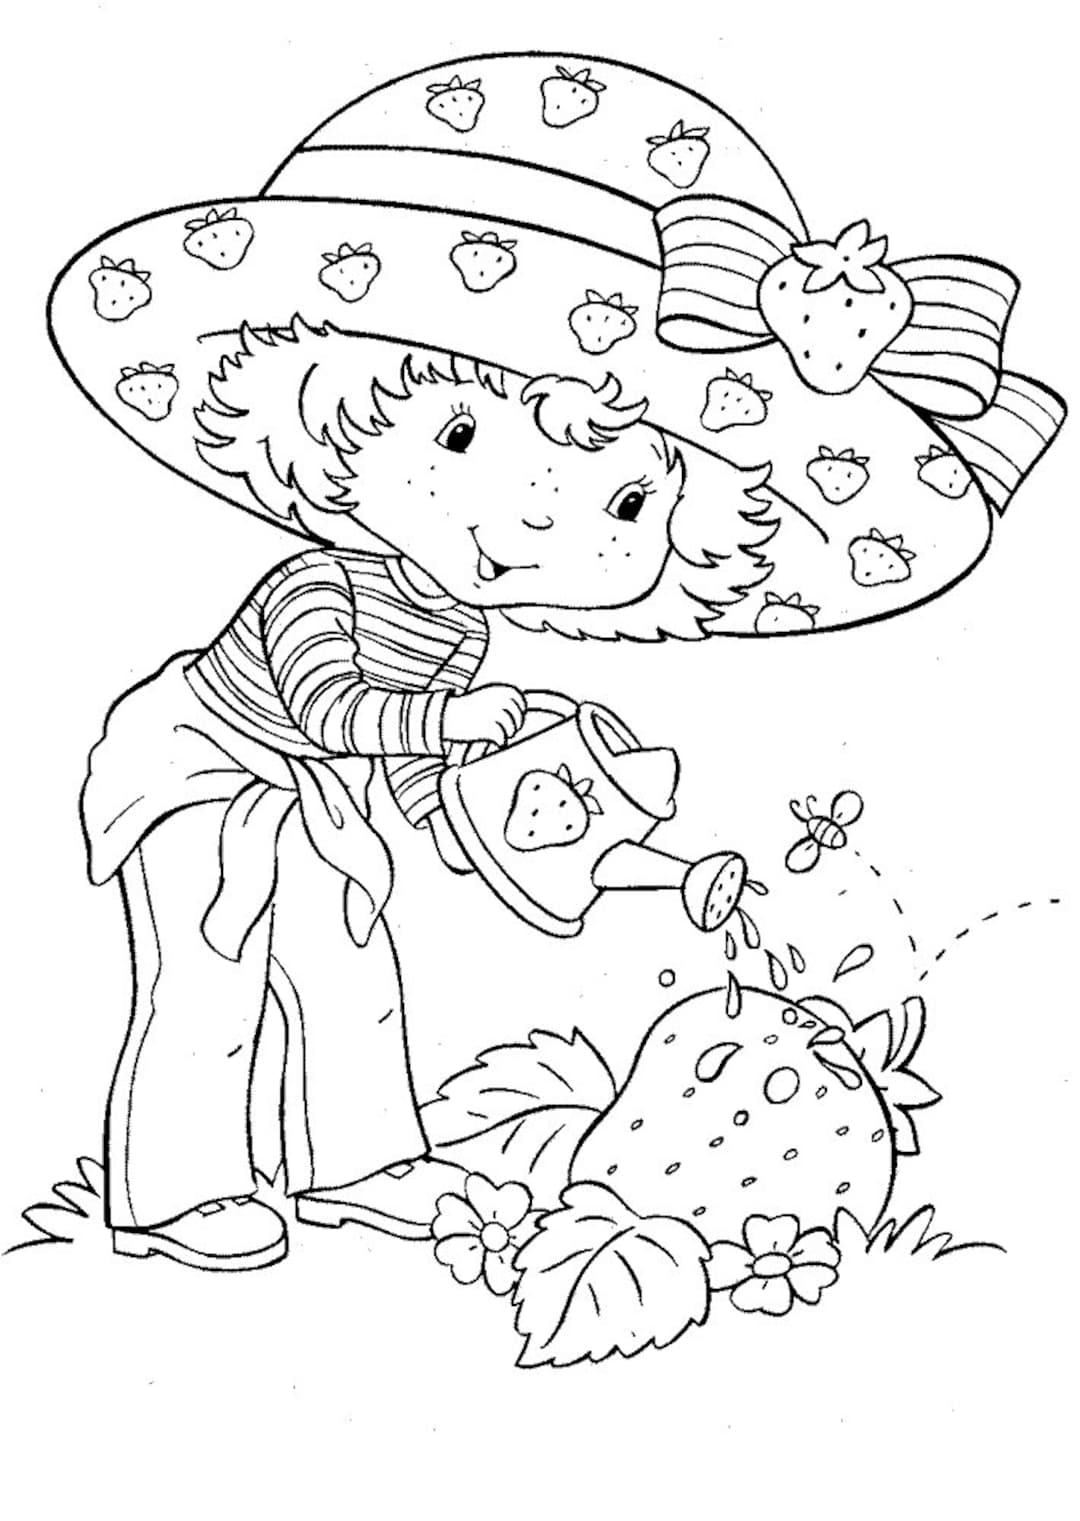 Pages strawberry shortcake coloring book